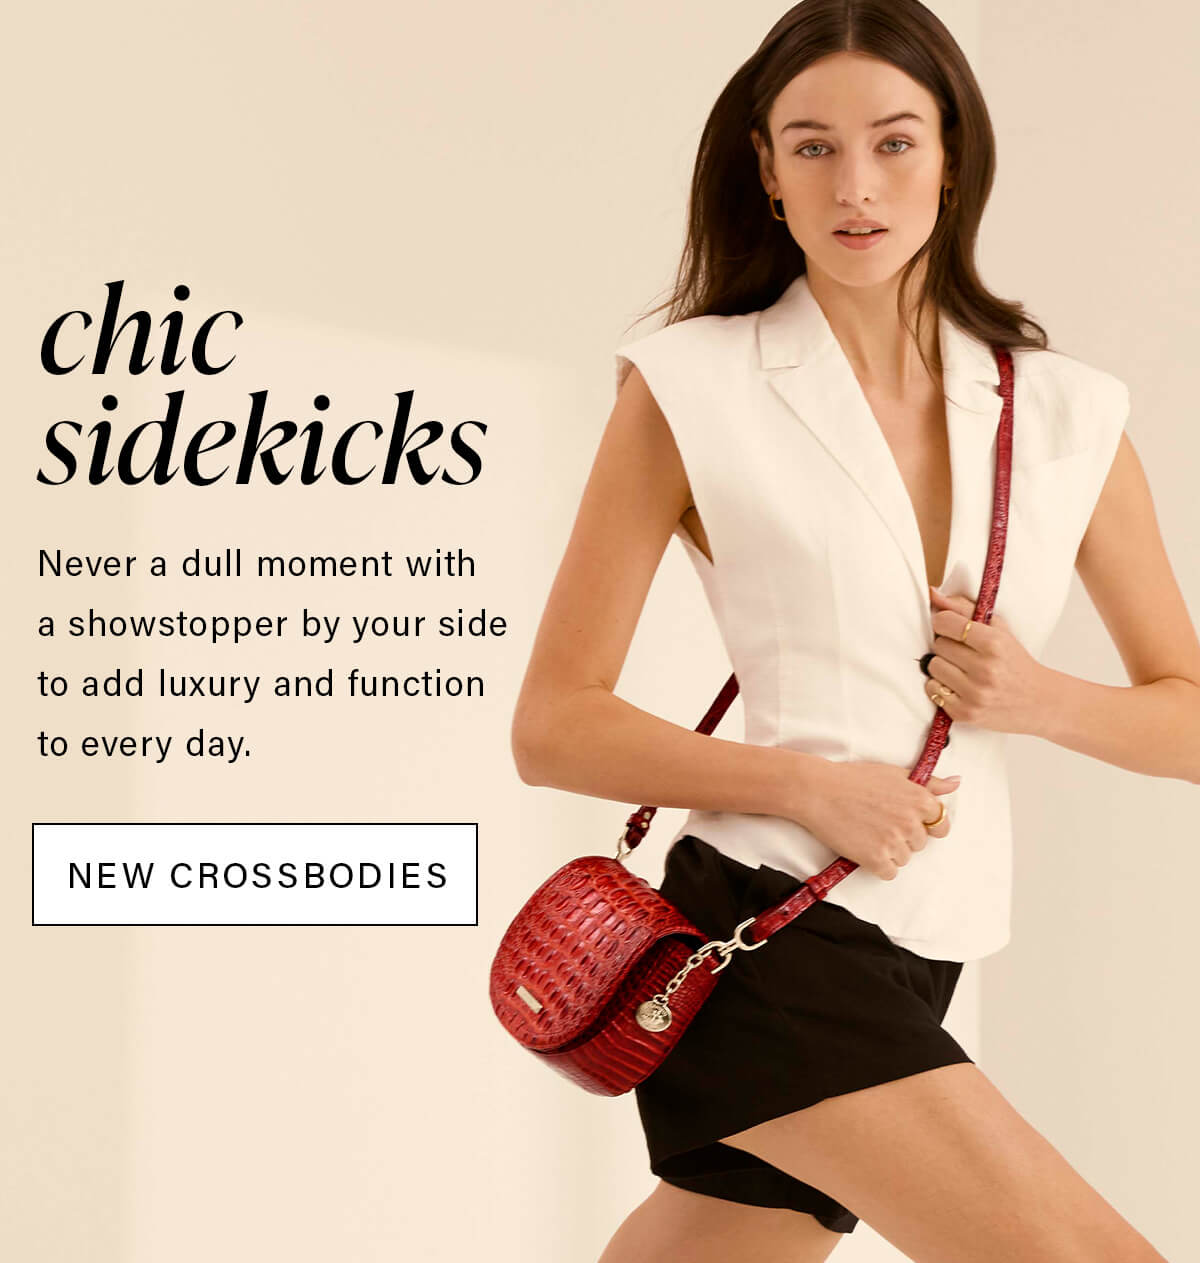 chic sidekicks Never a dull moment with a showstopper by your side to add luxury and function to every day. NEW CROSSBODIES